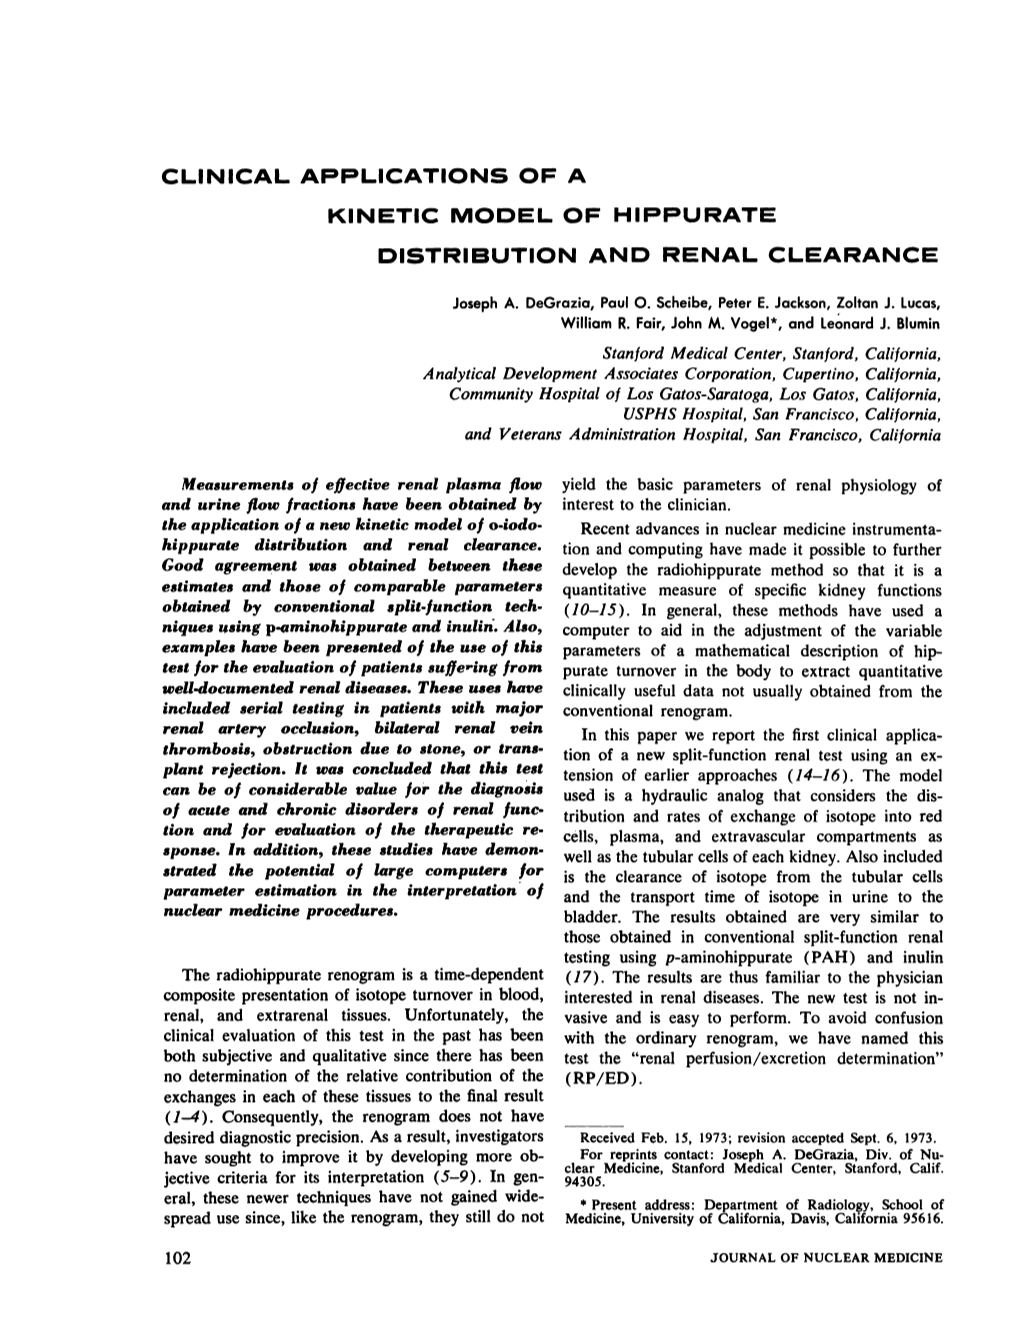 Clinical Applications of a Kinetic Model of Hippurate Distribution and Renal Clearance